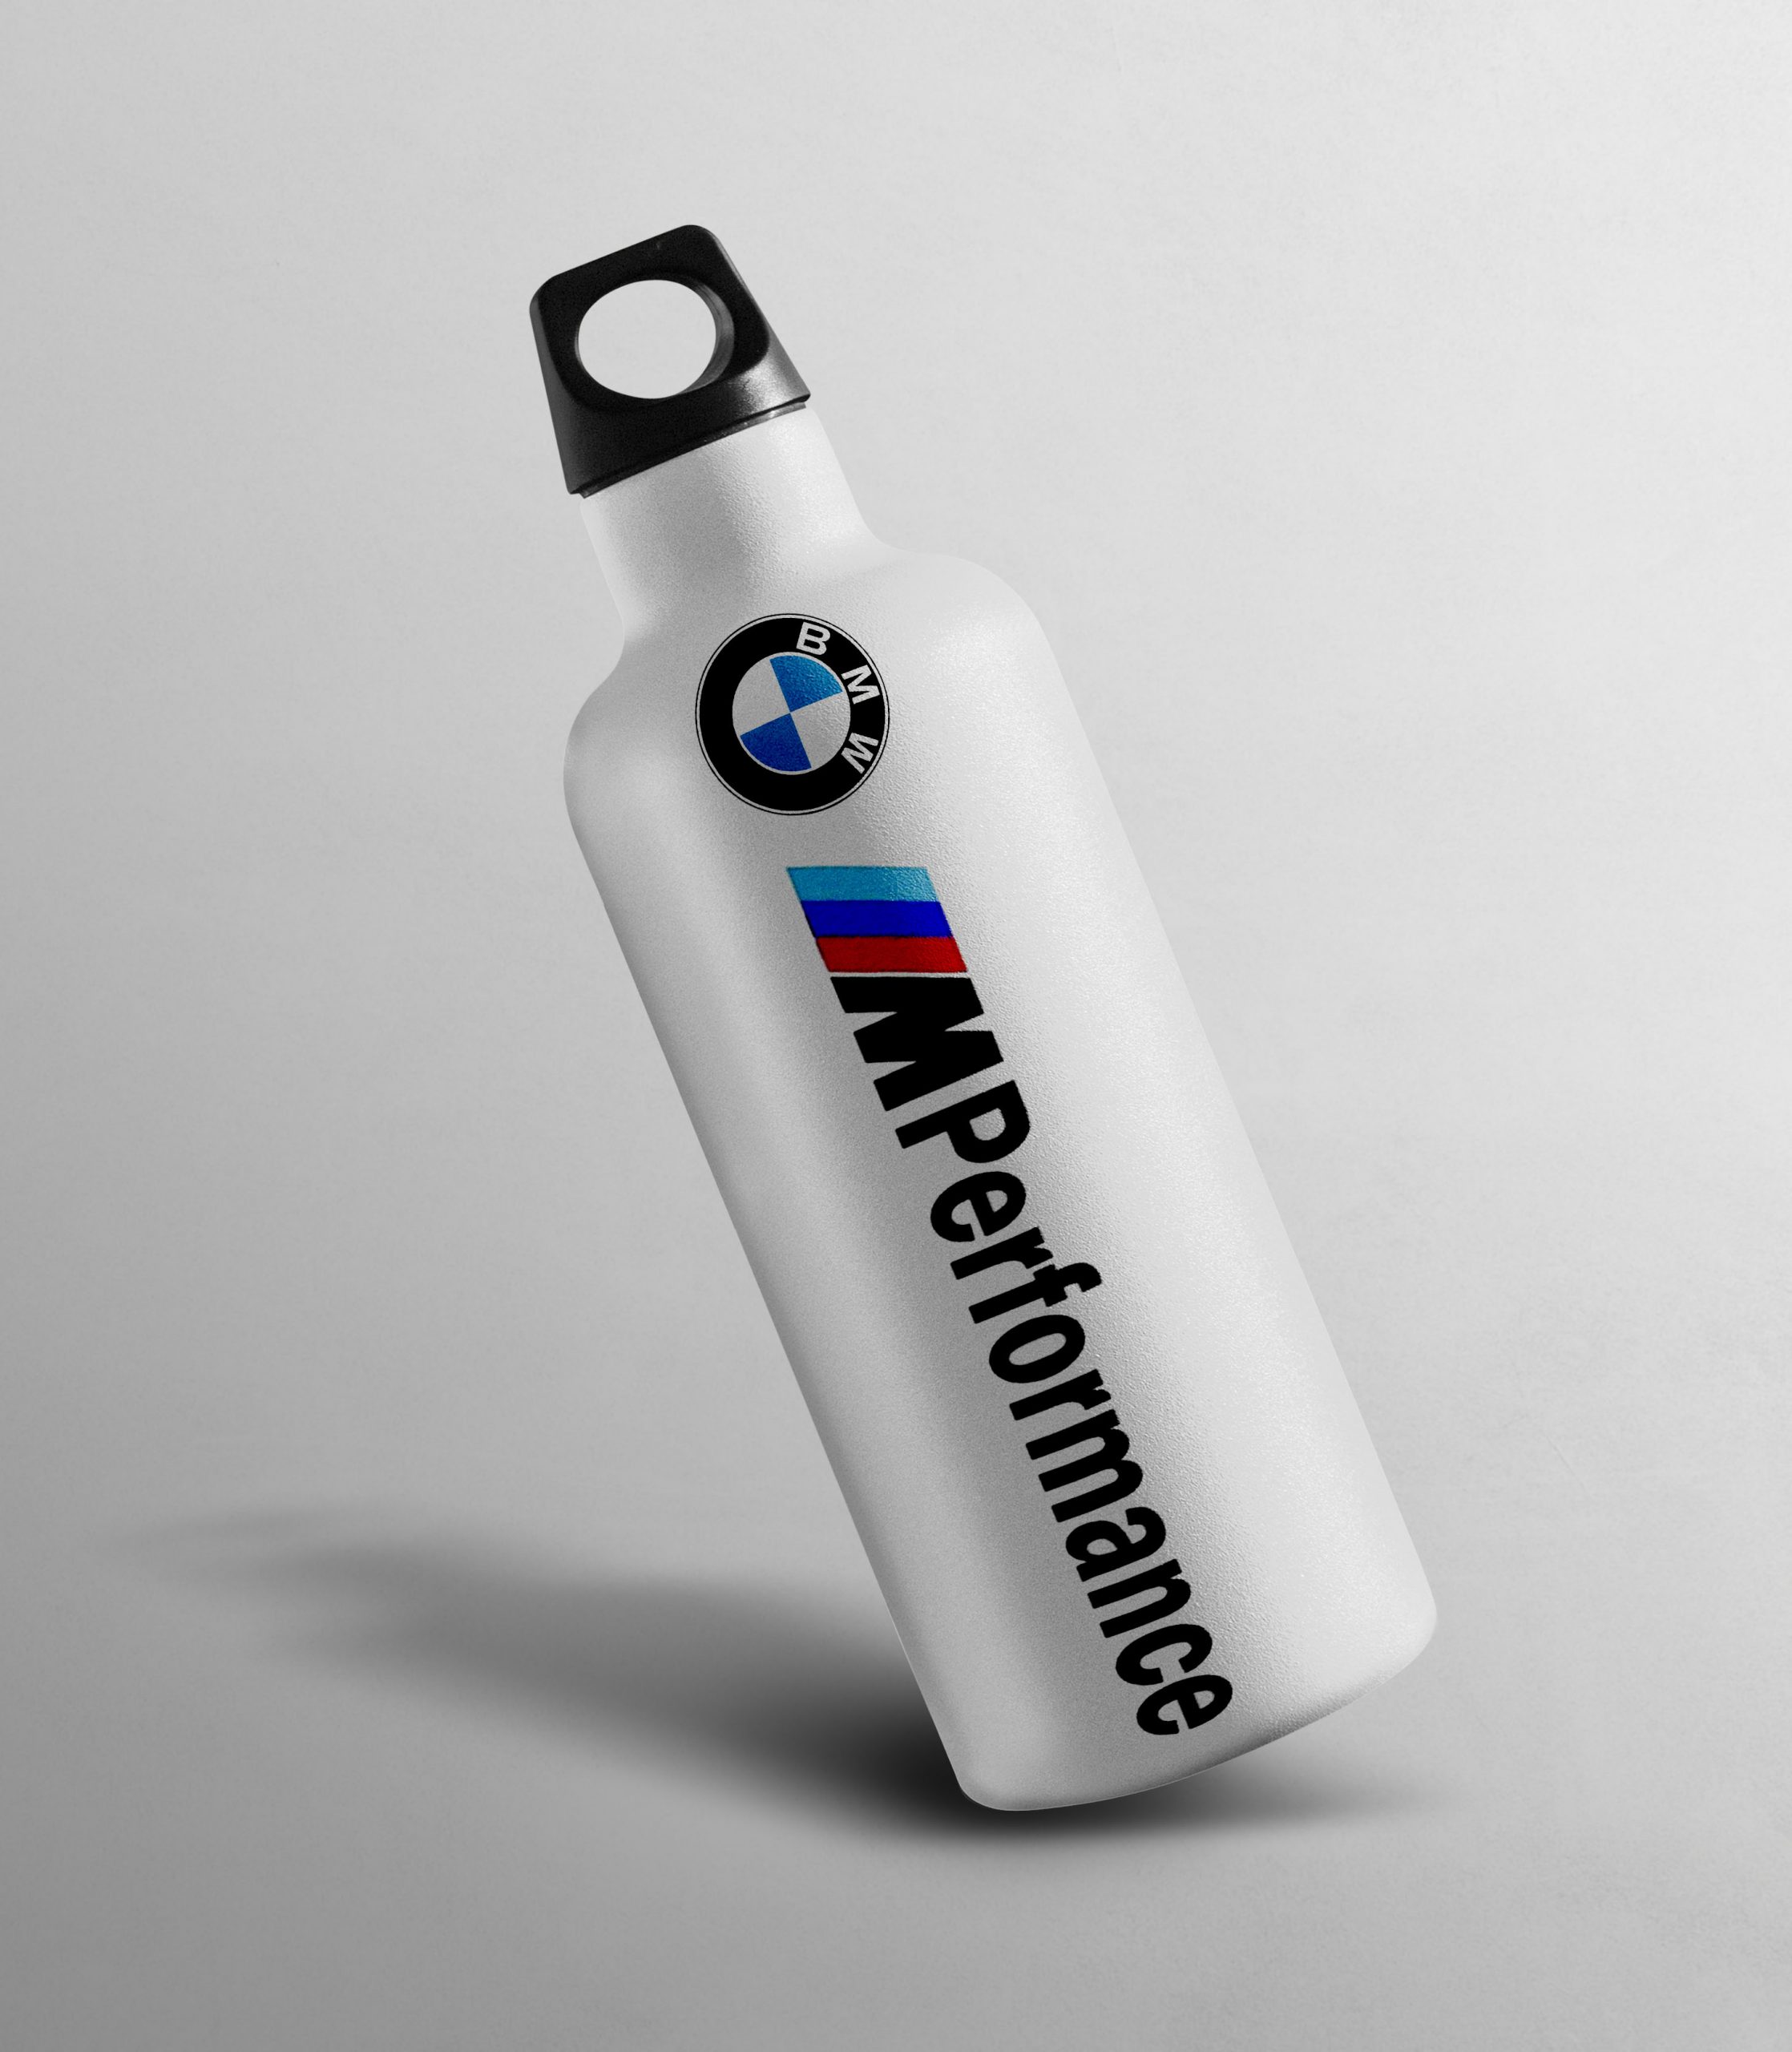 https://www.swagshirts99.com/wp-content/uploads/2022/12/Bmw-Sipper-Bottle-scaled.jpg